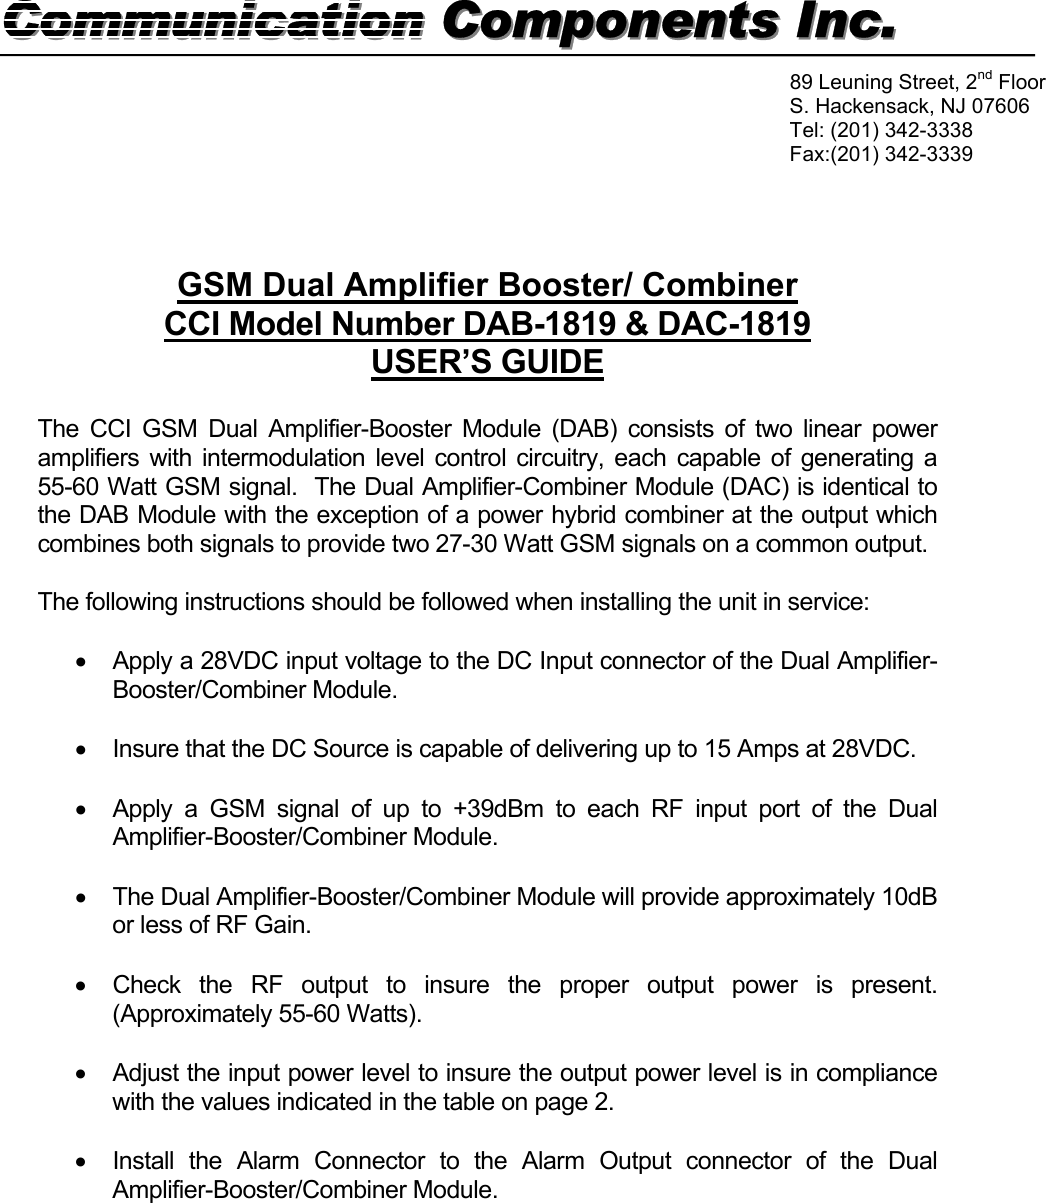   GSM Dual Amplifier Booster/ Combiner CCI Model Number DAB-1819 &amp; DAC-1819 USER’S GUIDE  The CCI GSM Dual Amplifier-Booster Module (DAB) consists of two linear power amplifiers with intermodulation level control circuitry, each capable of generating a 55-60 Watt GSM signal.  The Dual Amplifier-Combiner Module (DAC) is identical to the DAB Module with the exception of a power hybrid combiner at the output which combines both signals to provide two 27-30 Watt GSM signals on a common output.  The following instructions should be followed when installing the unit in service:  •  Apply a 28VDC input voltage to the DC Input connector of the Dual Amplifier-Booster/Combiner Module.  •  Insure that the DC Source is capable of delivering up to 15 Amps at 28VDC.  •  Apply a GSM signal of up to +39dBm to each RF input port of the Dual Amplifier-Booster/Combiner Module.  •  The Dual Amplifier-Booster/Combiner Module will provide approximately 10dB or less of RF Gain.  •  Check the RF output to insure the proper output power is present. (Approximately 55-60 Watts).  •  Adjust the input power level to insure the output power level is in compliance with the values indicated in the table on page 2.  •  Install the Alarm Connector to the Alarm Output connector of the Dual Amplifier-Booster/Combiner Module.       Communication Components Inc.Communication Components Inc. 89 Leuning Street, 2nd Floor S. Hackensack, NJ 07606 Tel: (201) 342-3338 Fax:(201) 342-3339  